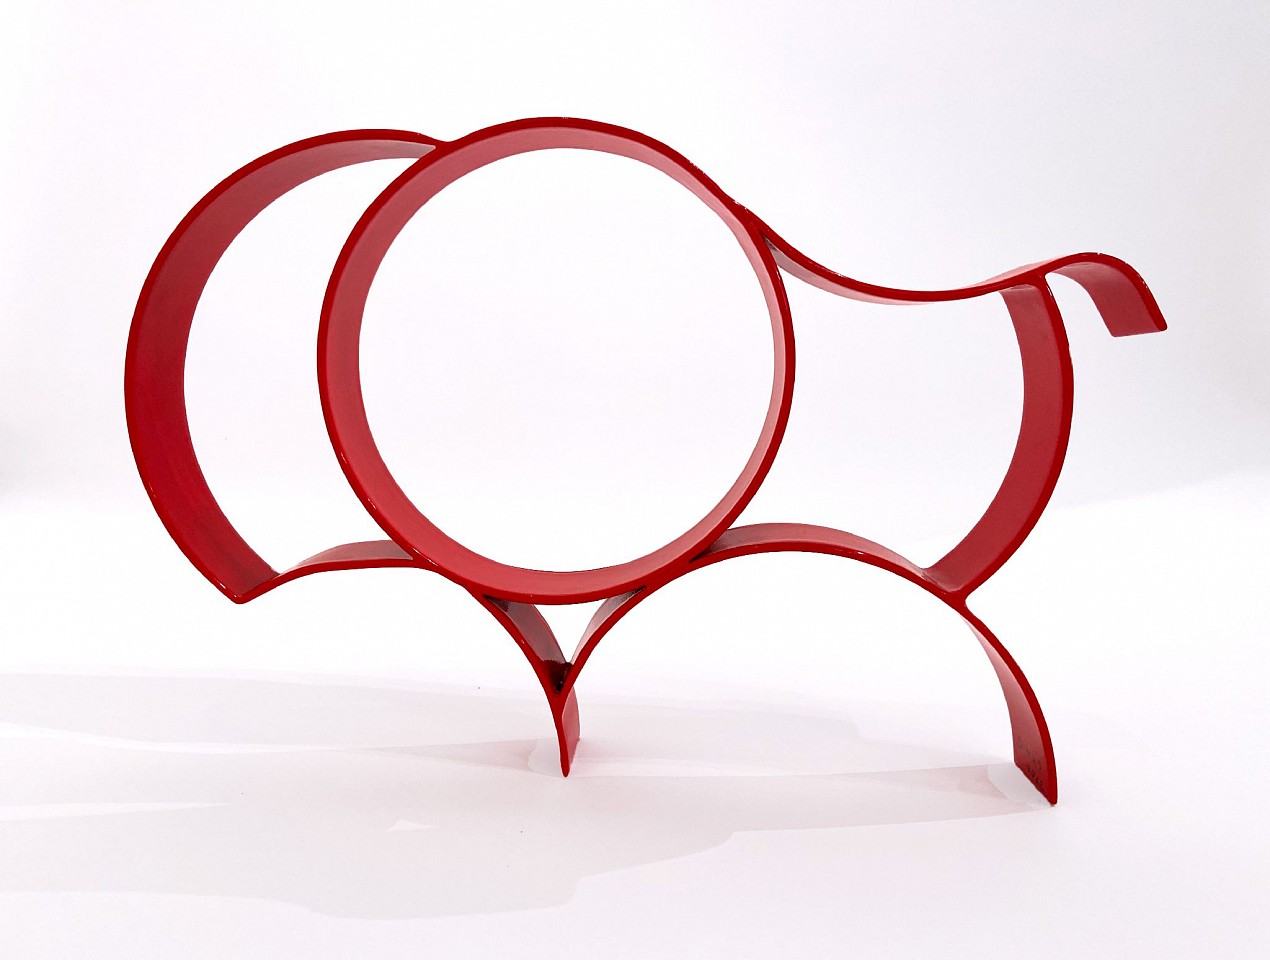 John Simms, Bison of Equal Radii - Mixed Parentage (Red)
Powder Coated Steel, 12 1/2 x 19 1/2 x 2 in. (31.8 x 49.5 x 5.1 cm)
07265